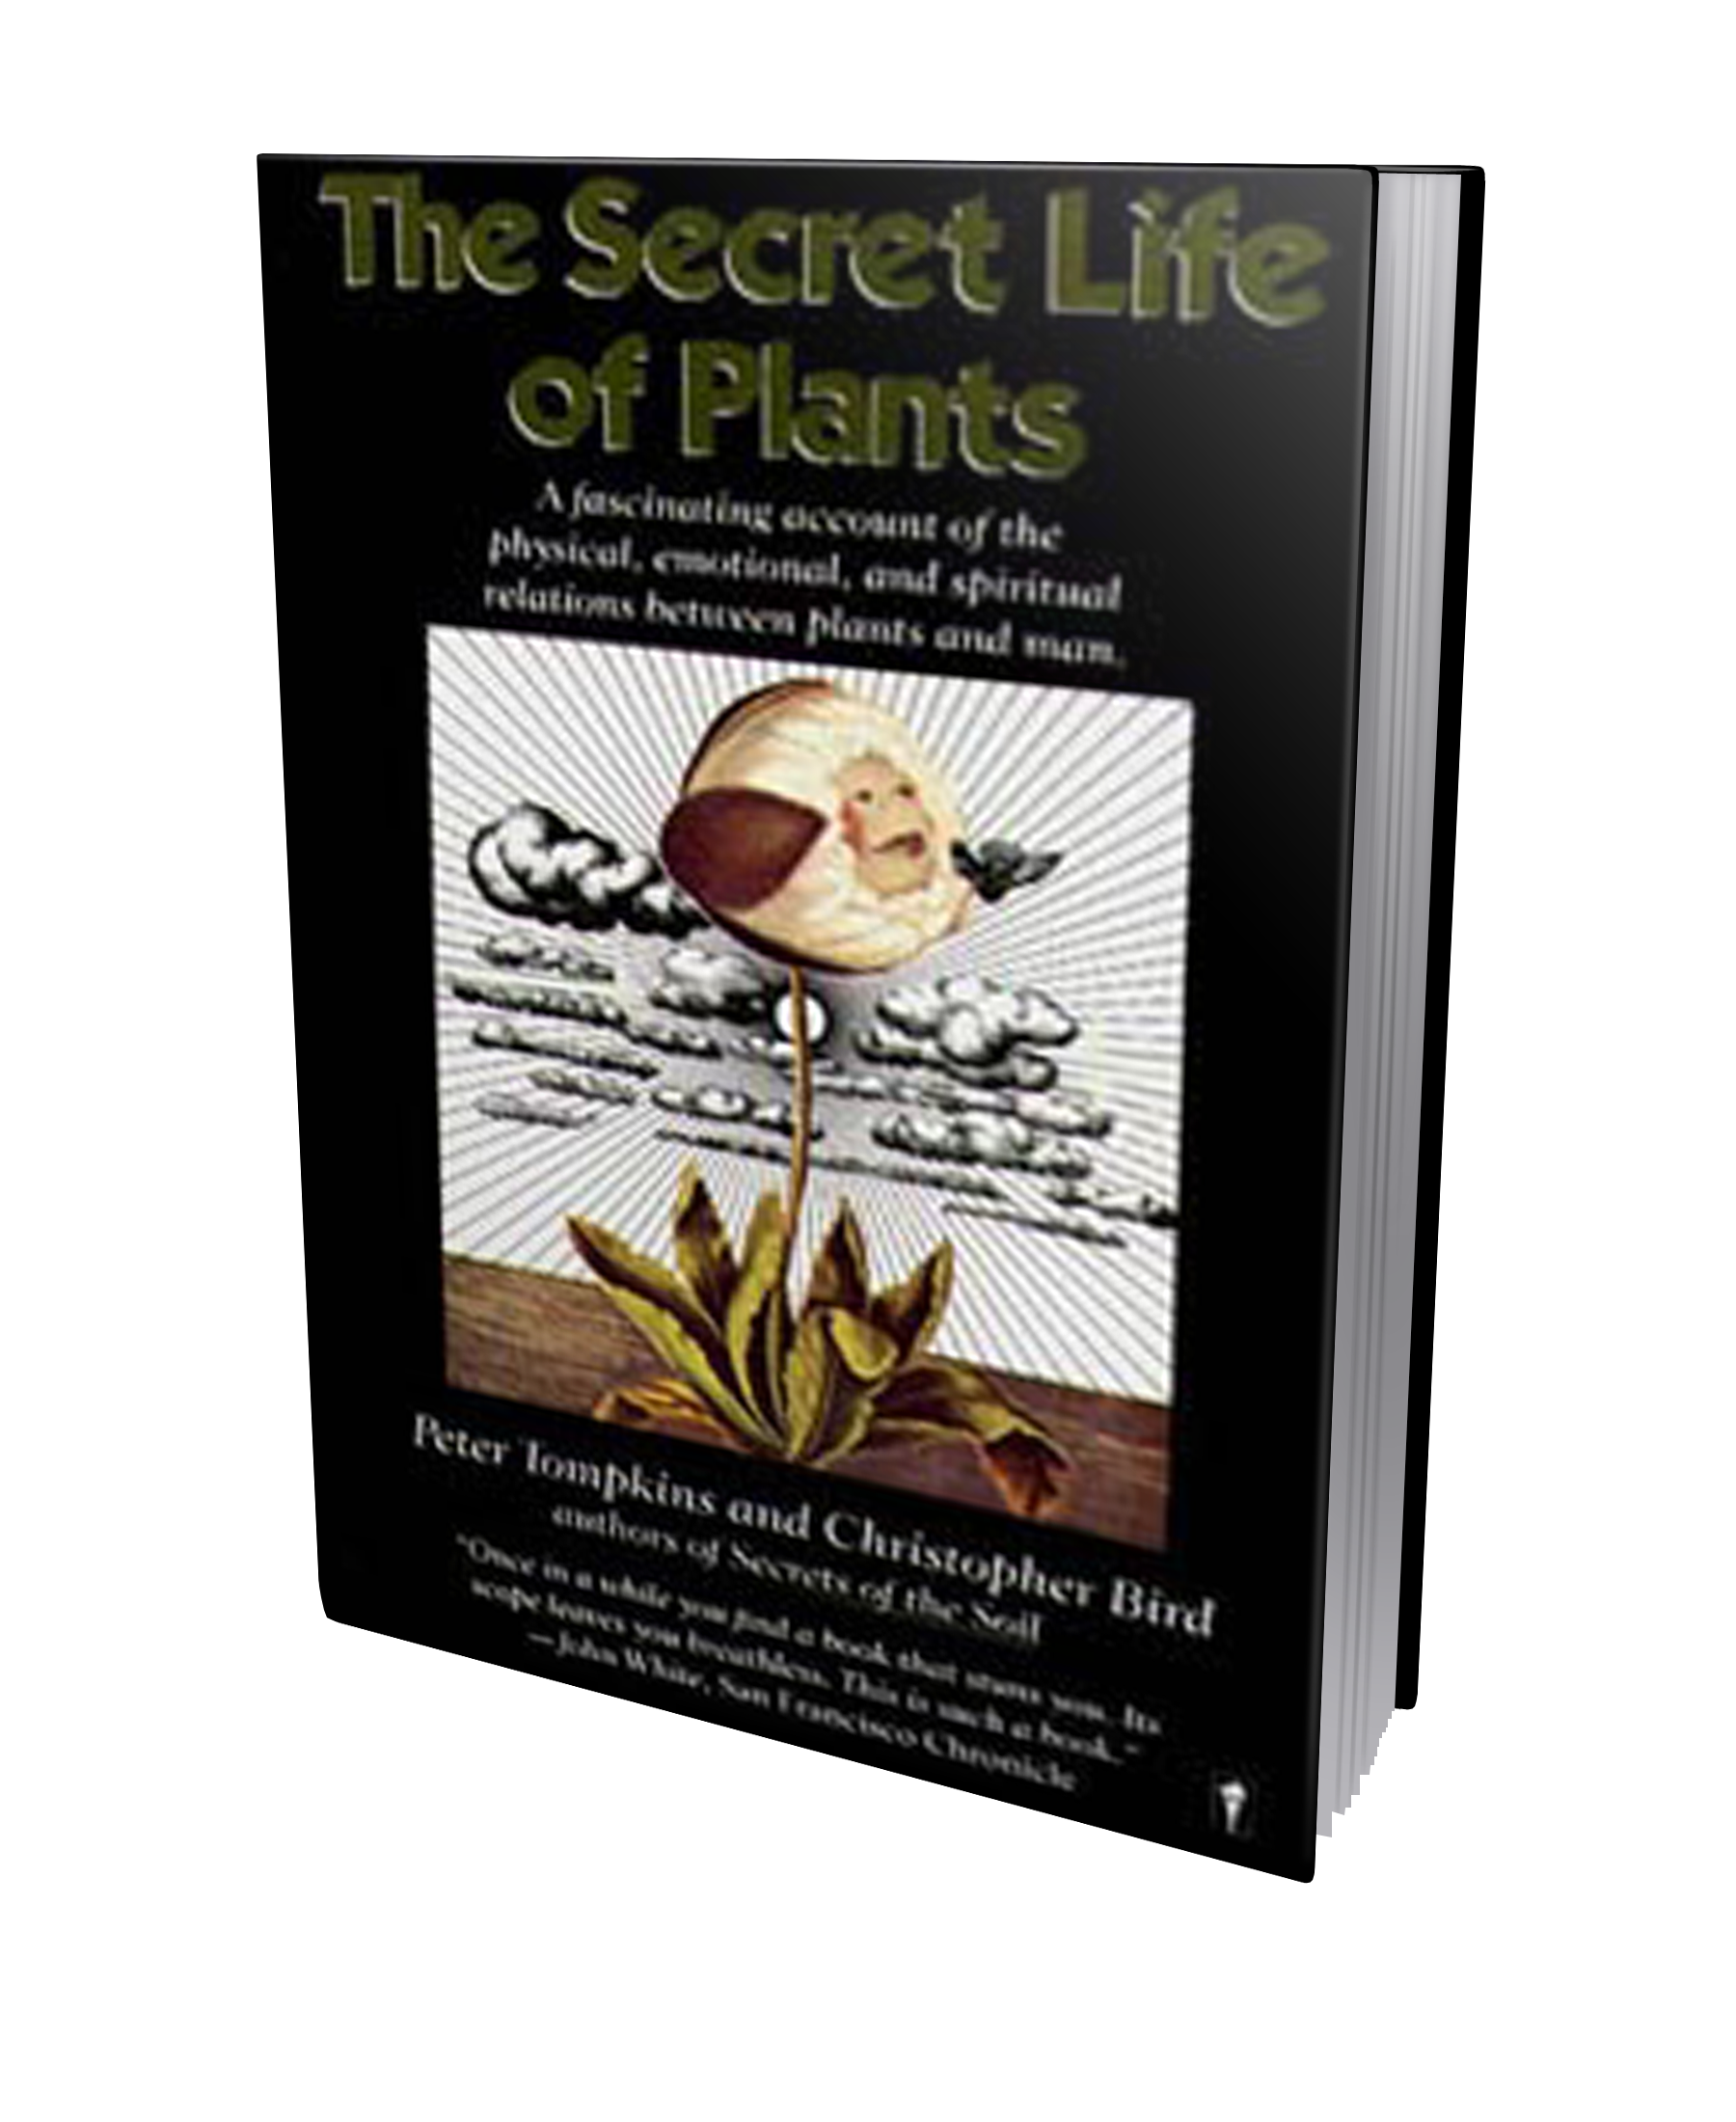 The Secret Life of Plants by Peter Tompkins